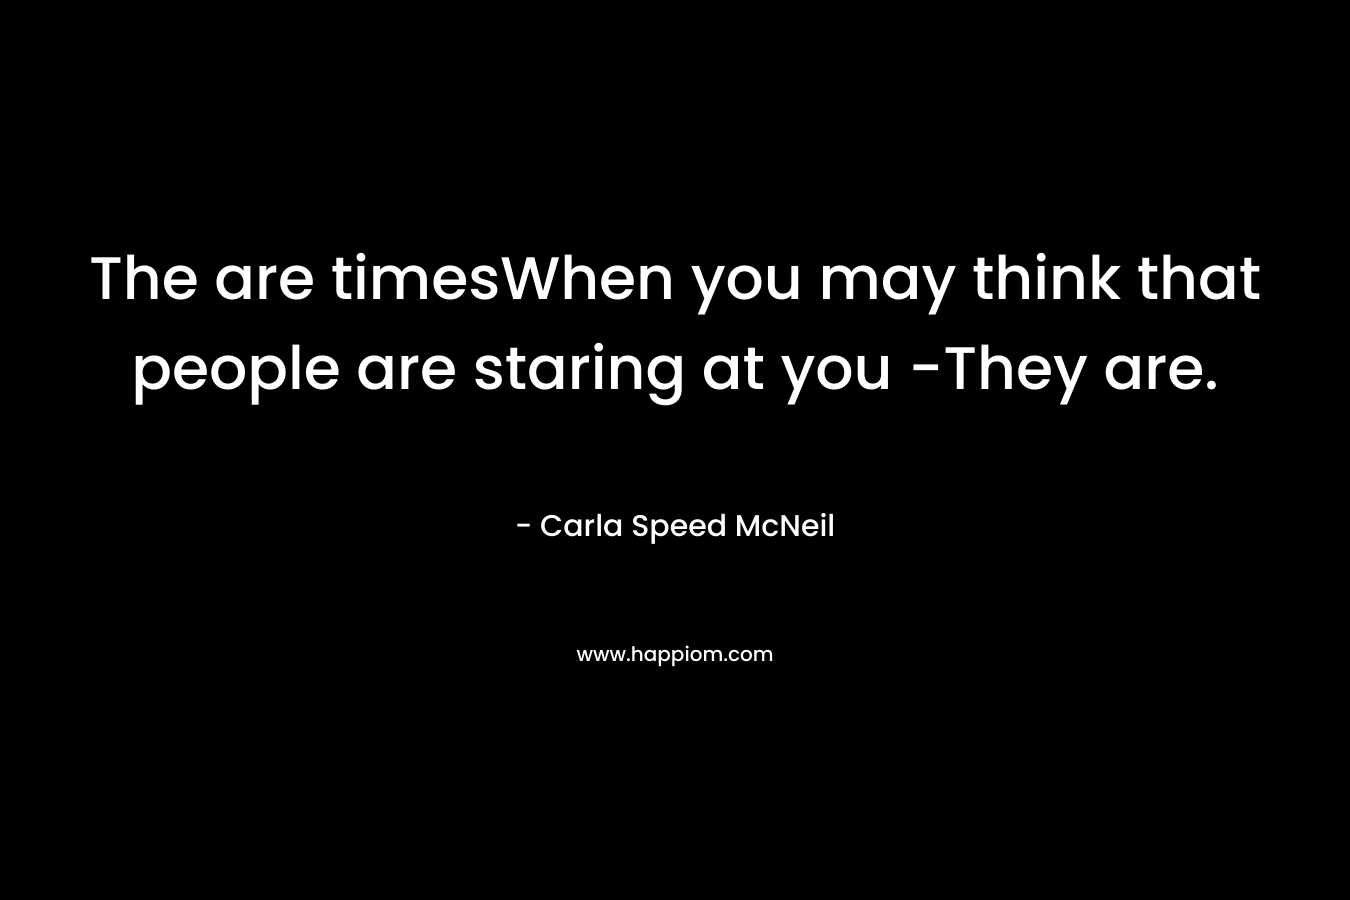 The are timesWhen you may think that people are staring at you -They are.